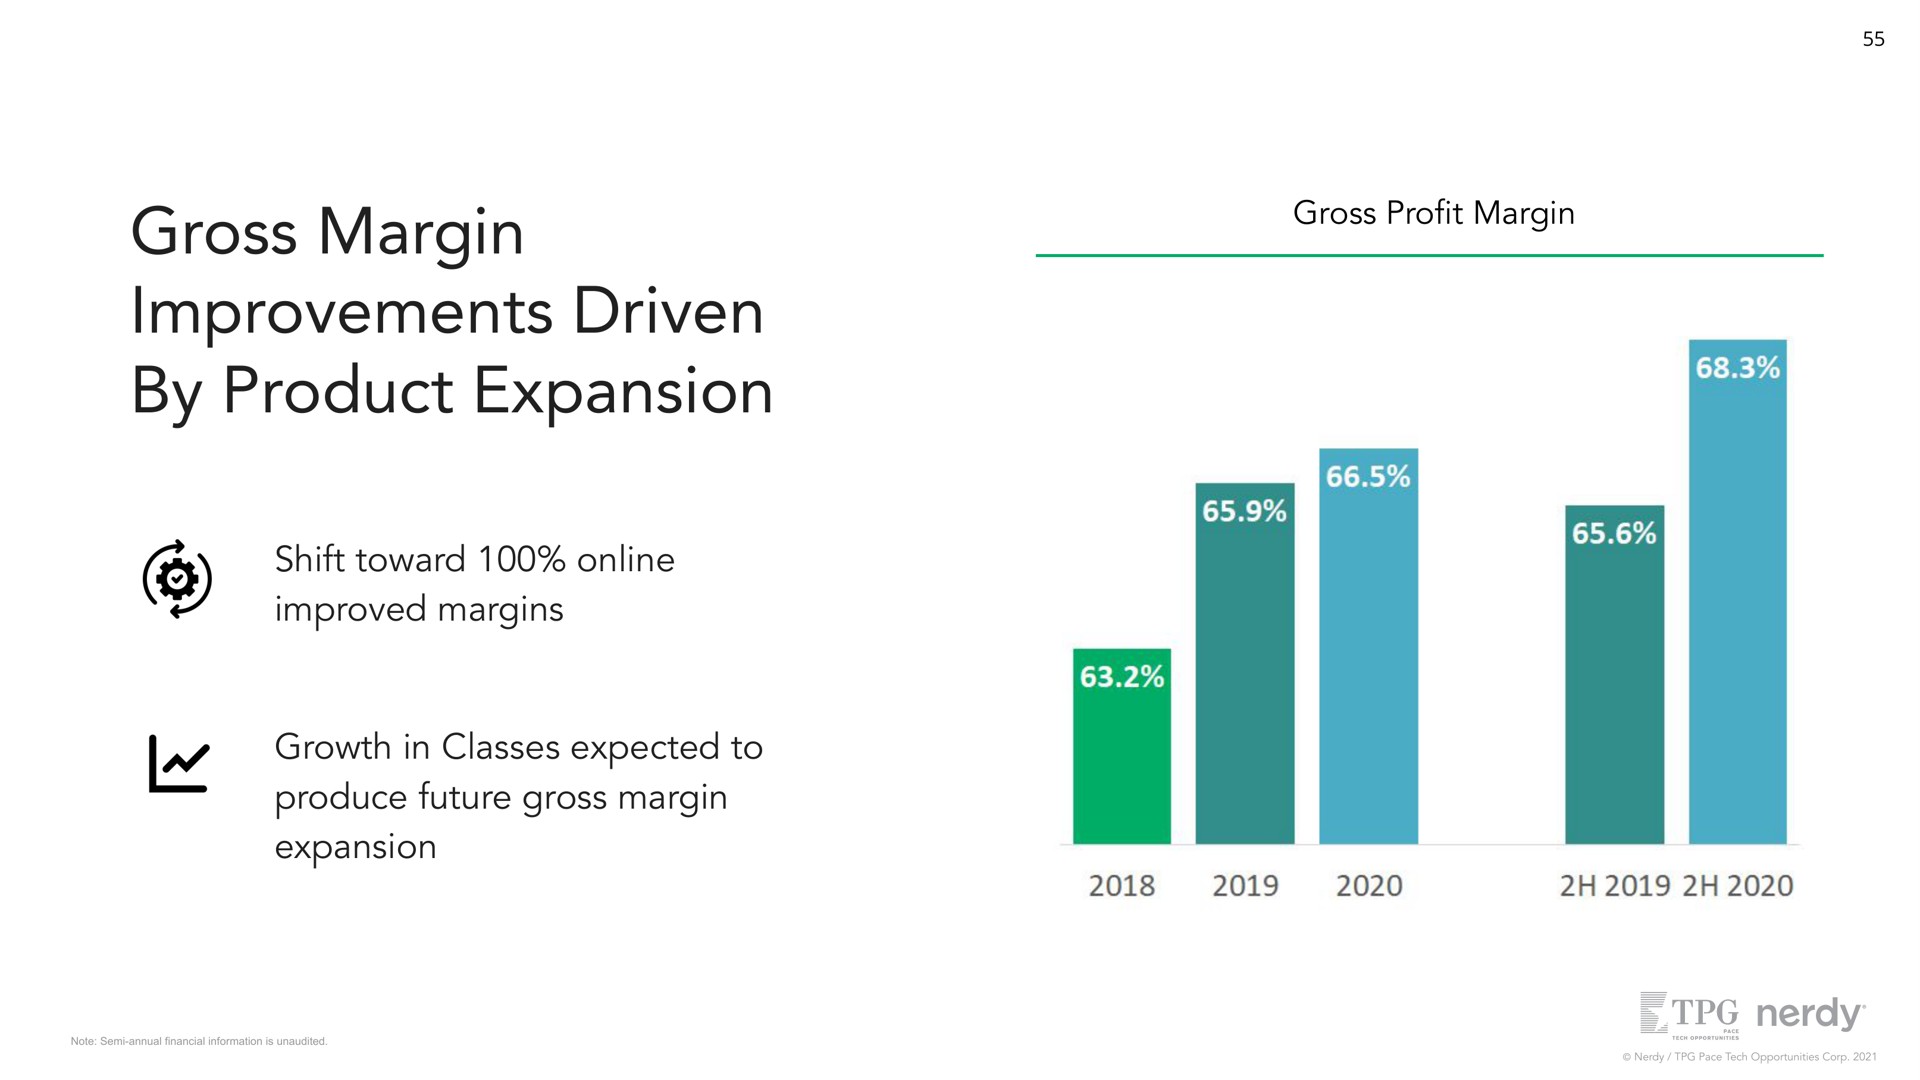 gross pro margin gross margin improvements driven by product expansion shift toward improved margins growth in classes expected to produce future gross margin expansion | Nerdy